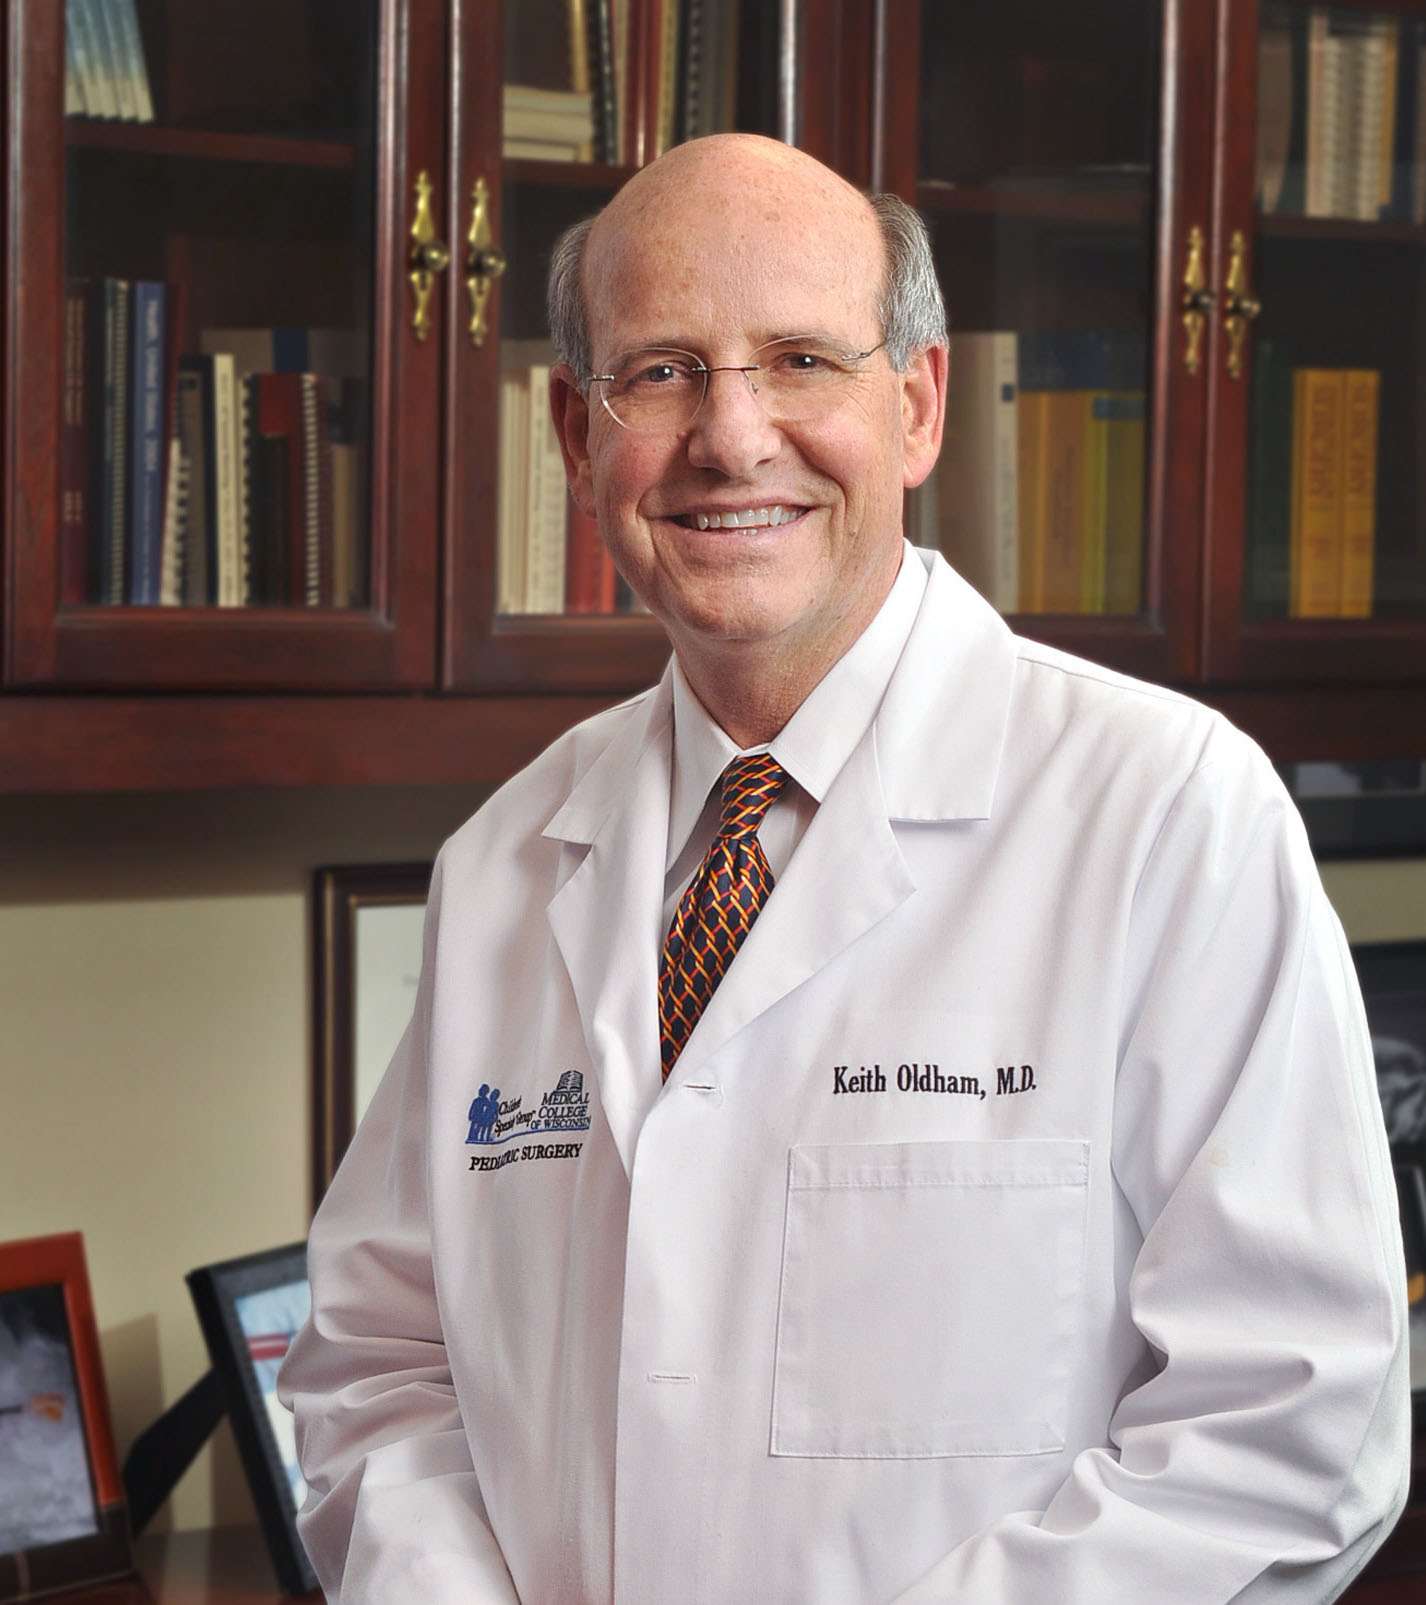 Keith Oldham, MD